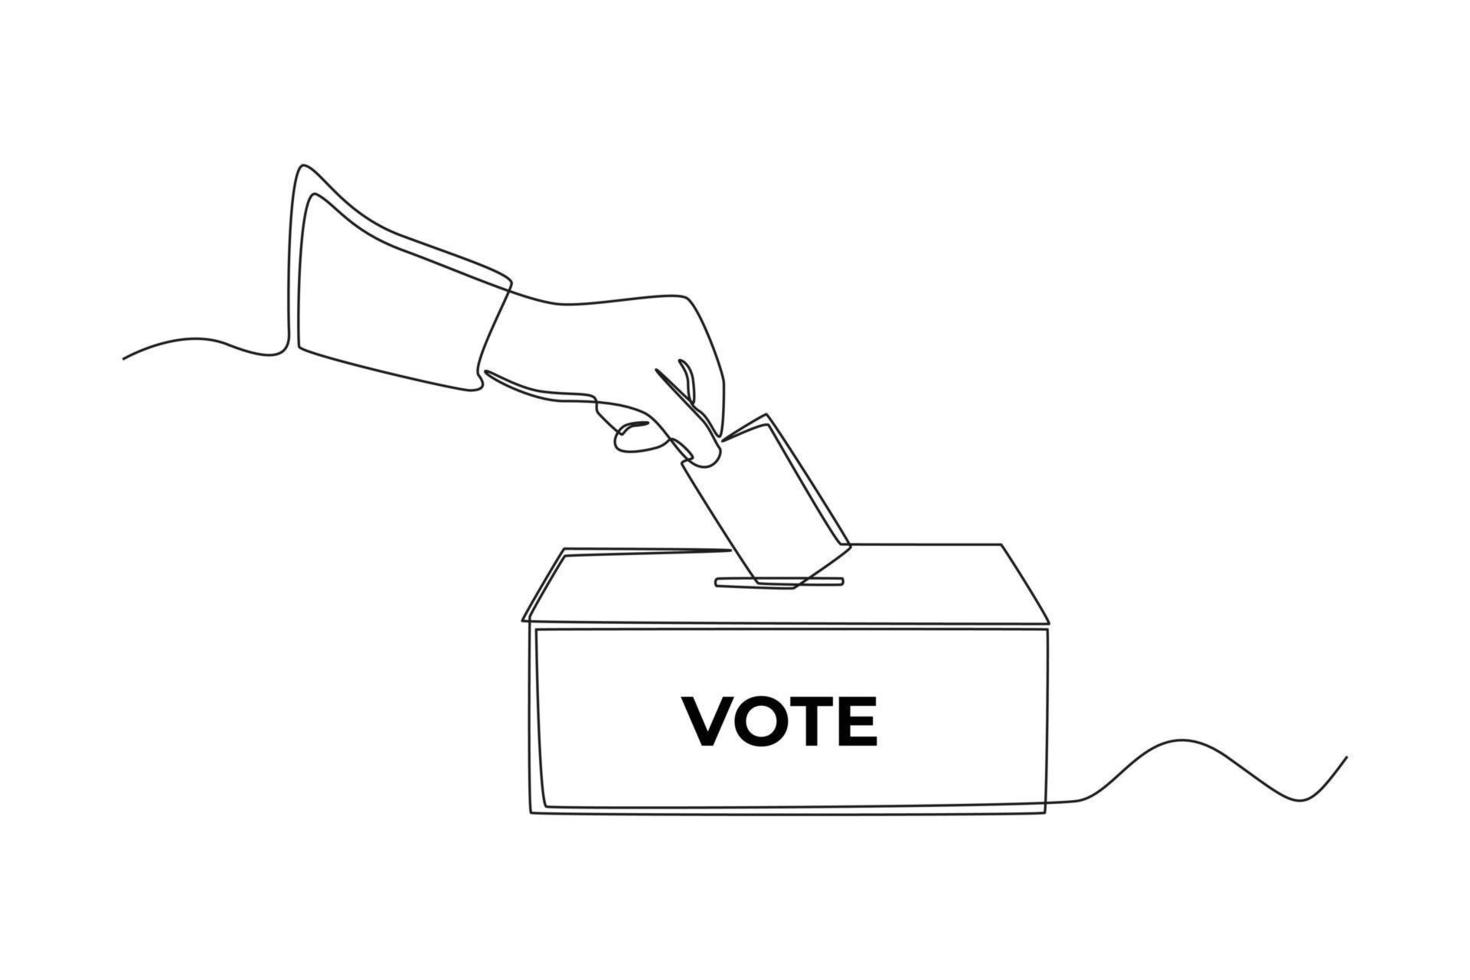 Continuous one line drawing hand putting paper in the ballot box for General Regional or Presidential Election. Voting concept. Single line draw design vector graphic illustration.